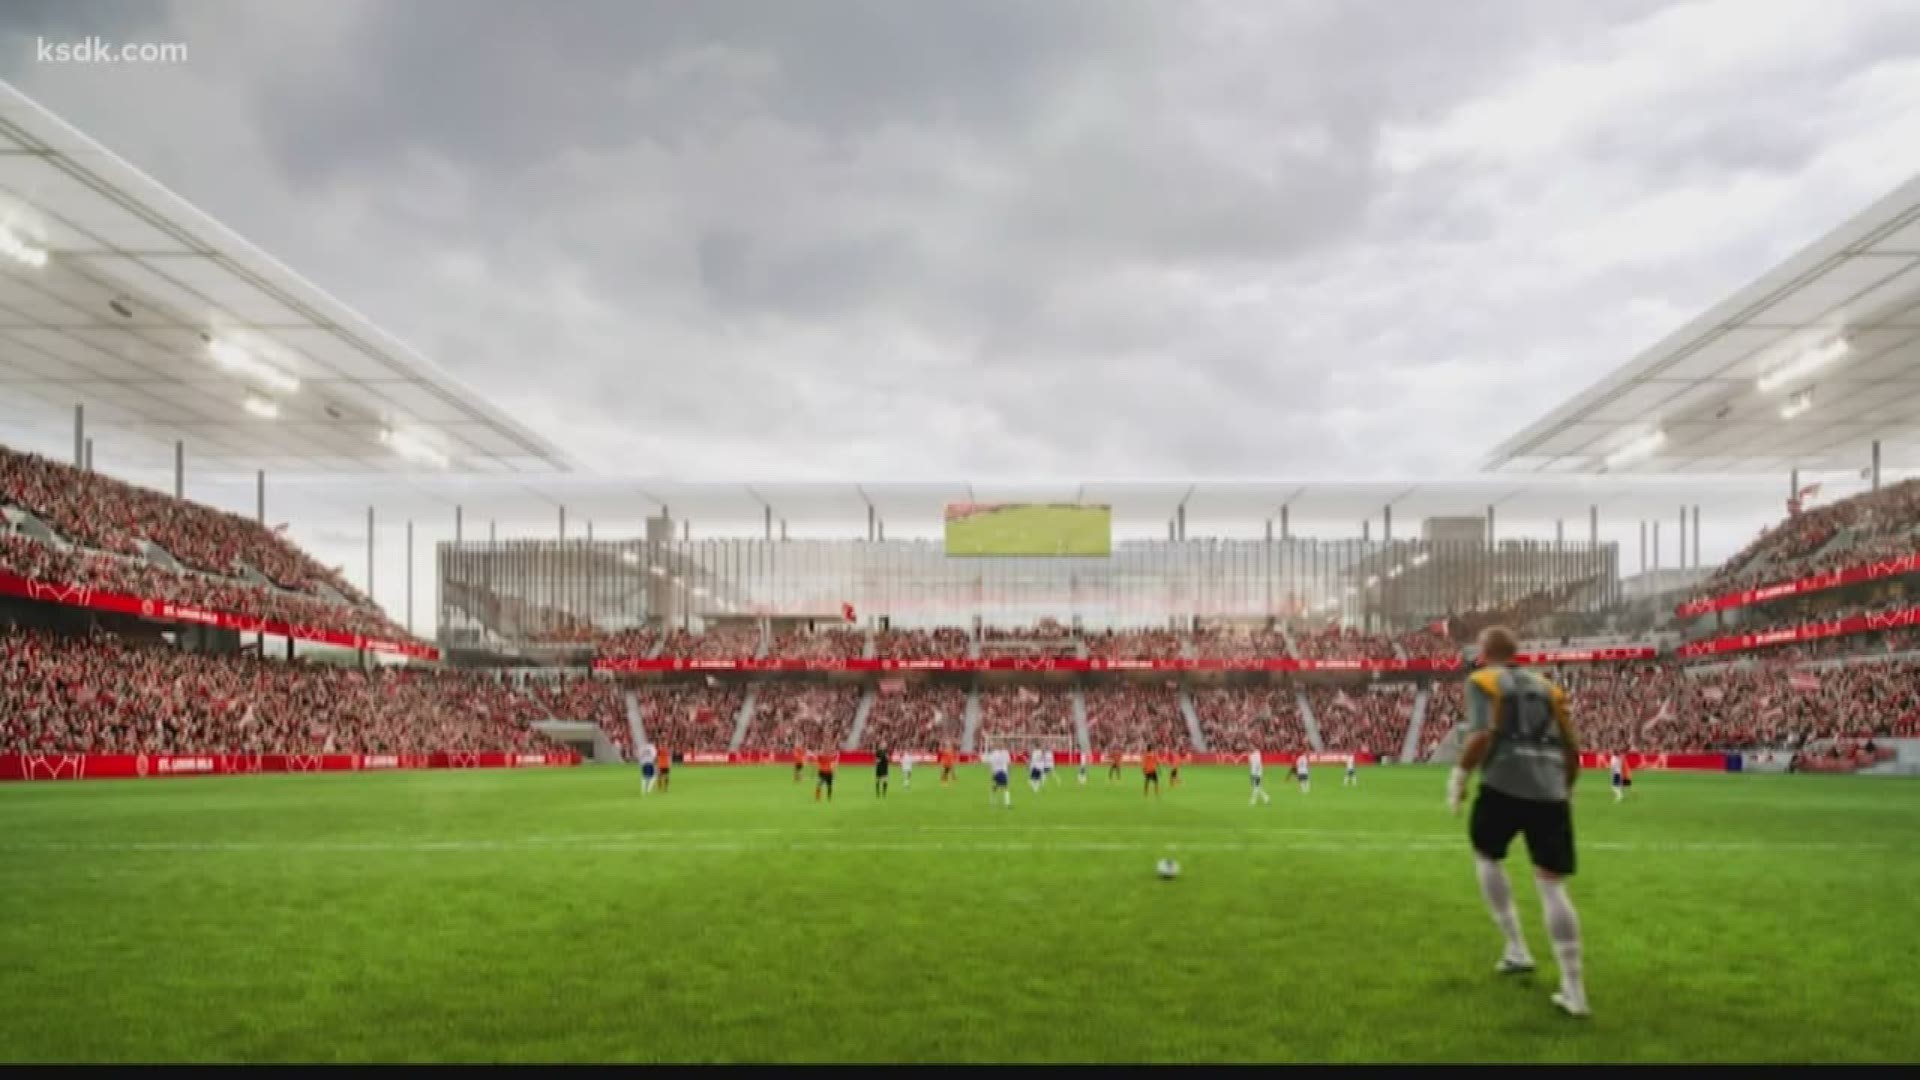 Plans are in place for the city's new Major League Soccer stadium. But in order for construction to officially begin, the city has the approve the deal.